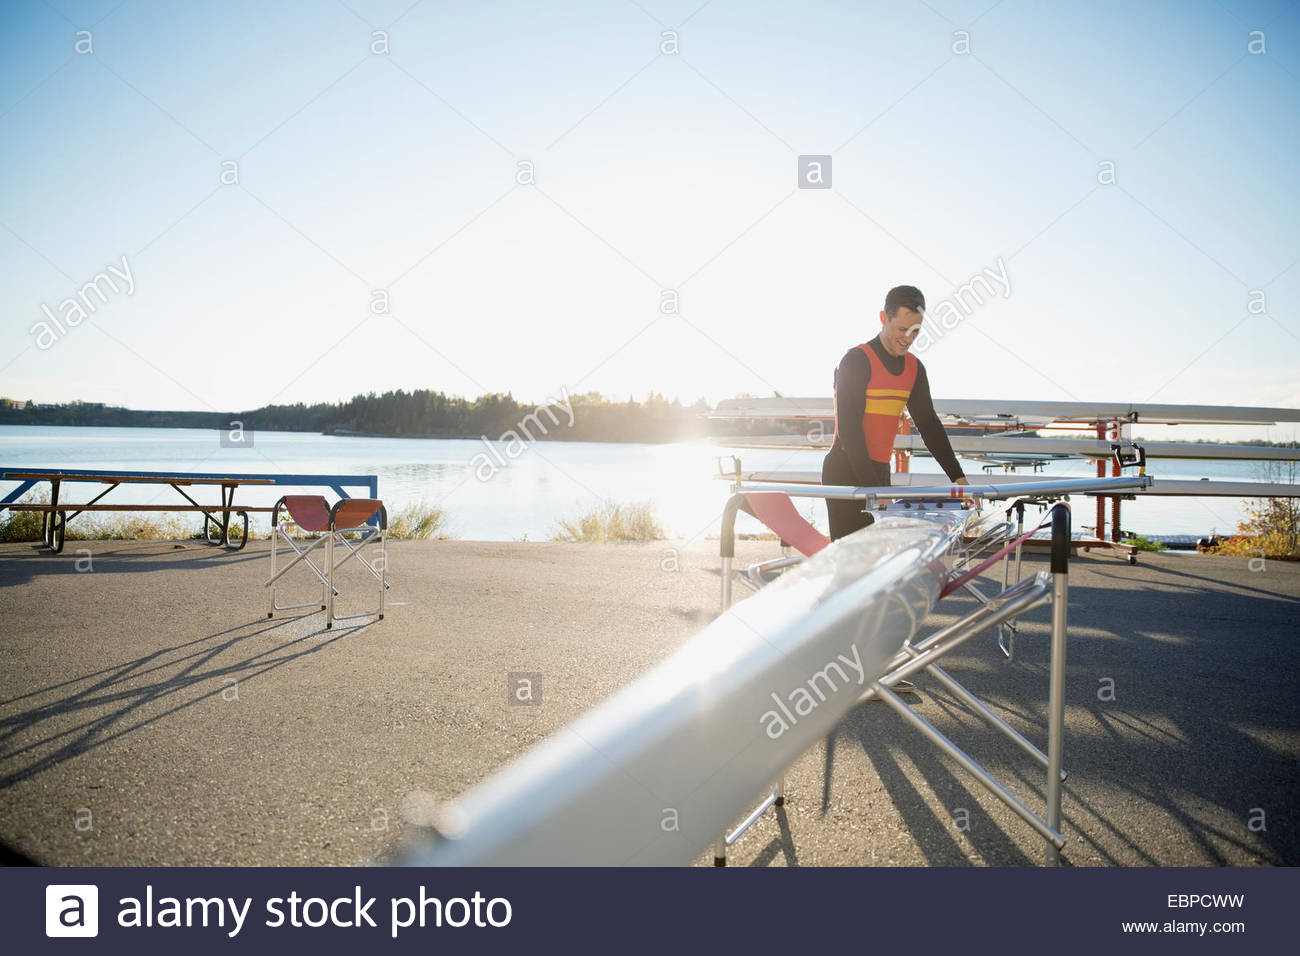 Rower with scull at waterfront Stock Photo